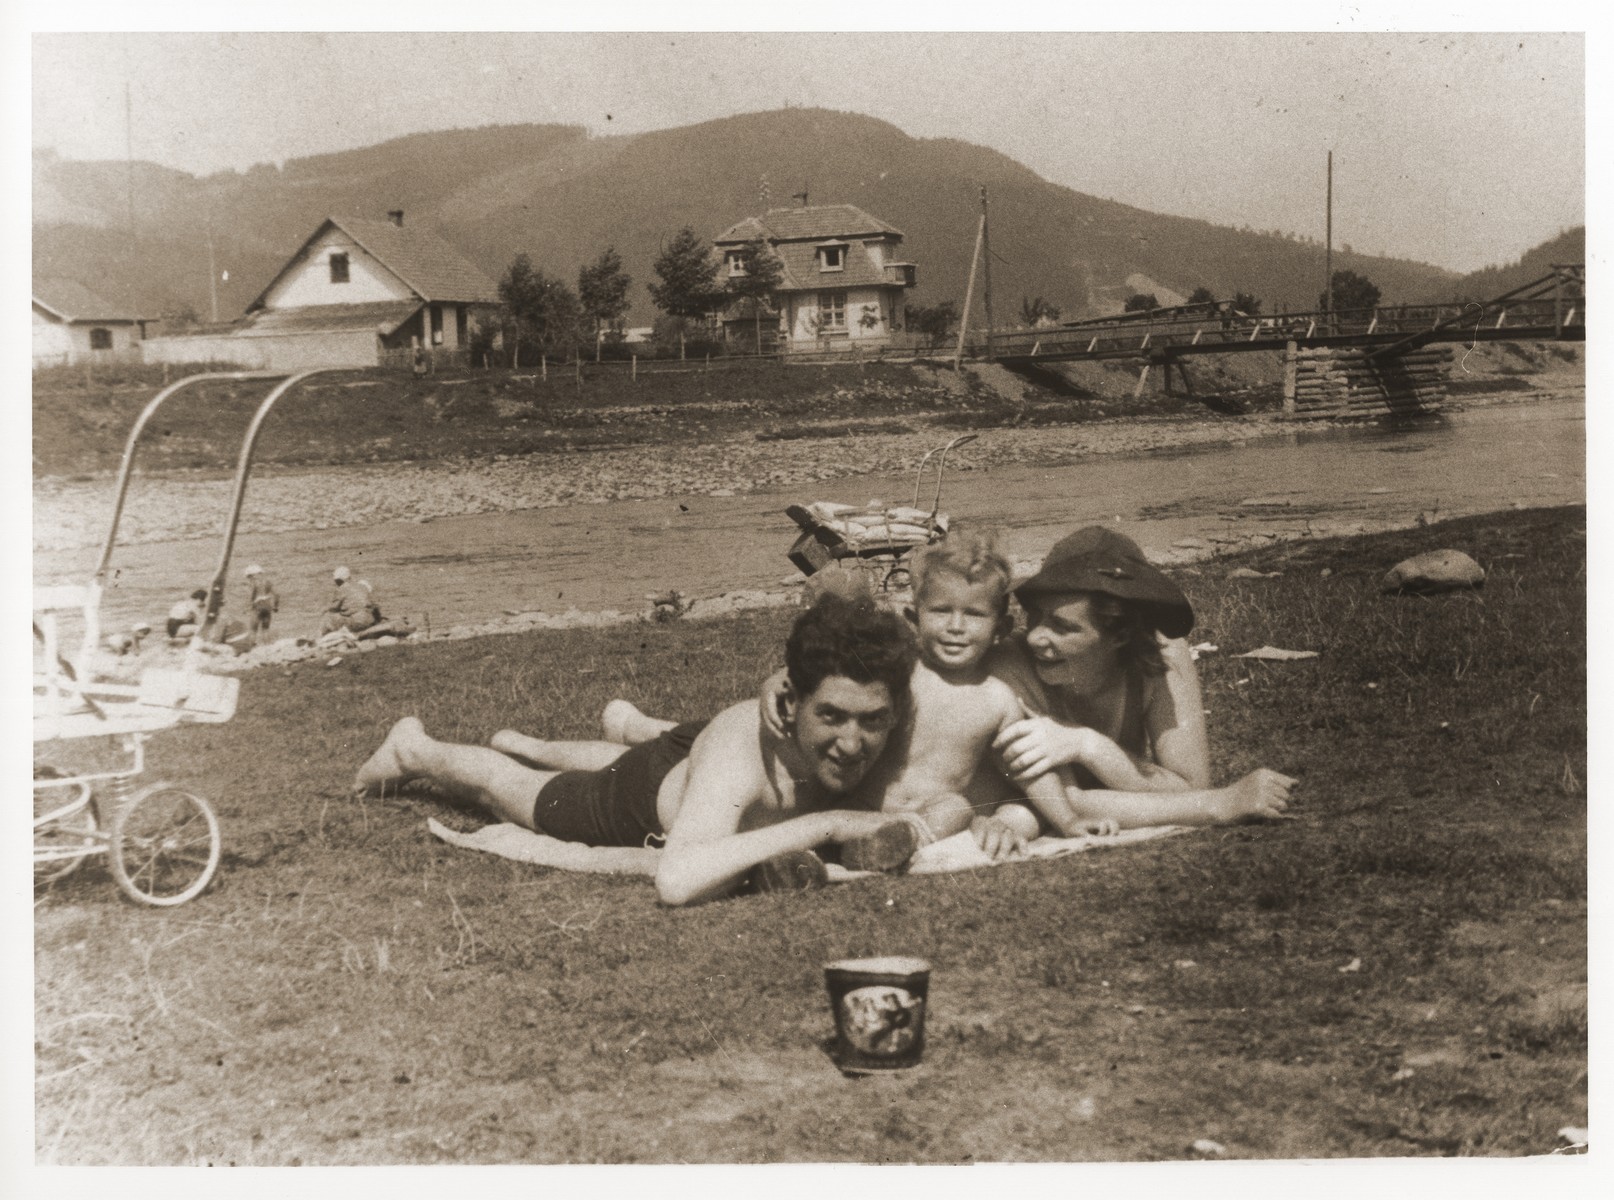 A Jewish couple sunbathes with their son on the beach in the resort town of Skole, shortly before the German invasion of Poland.

Pictured are Izio and Anda Littman with their son, Otto.